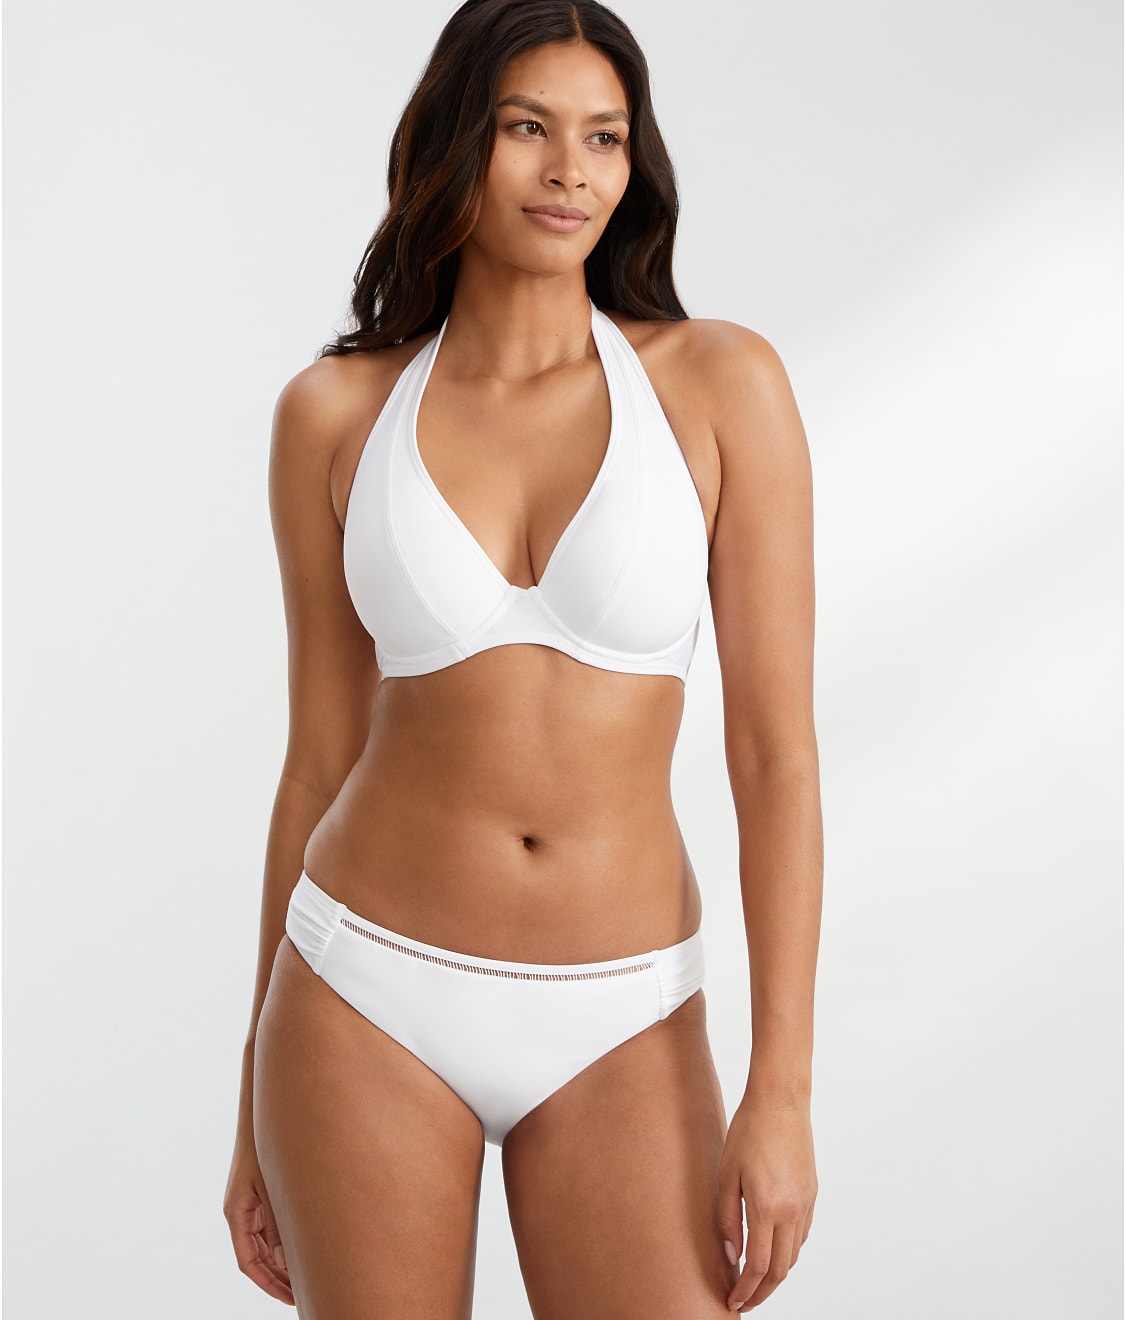 Sunsets: White Lily Muse Halter Bikini Top 51D-WHILI